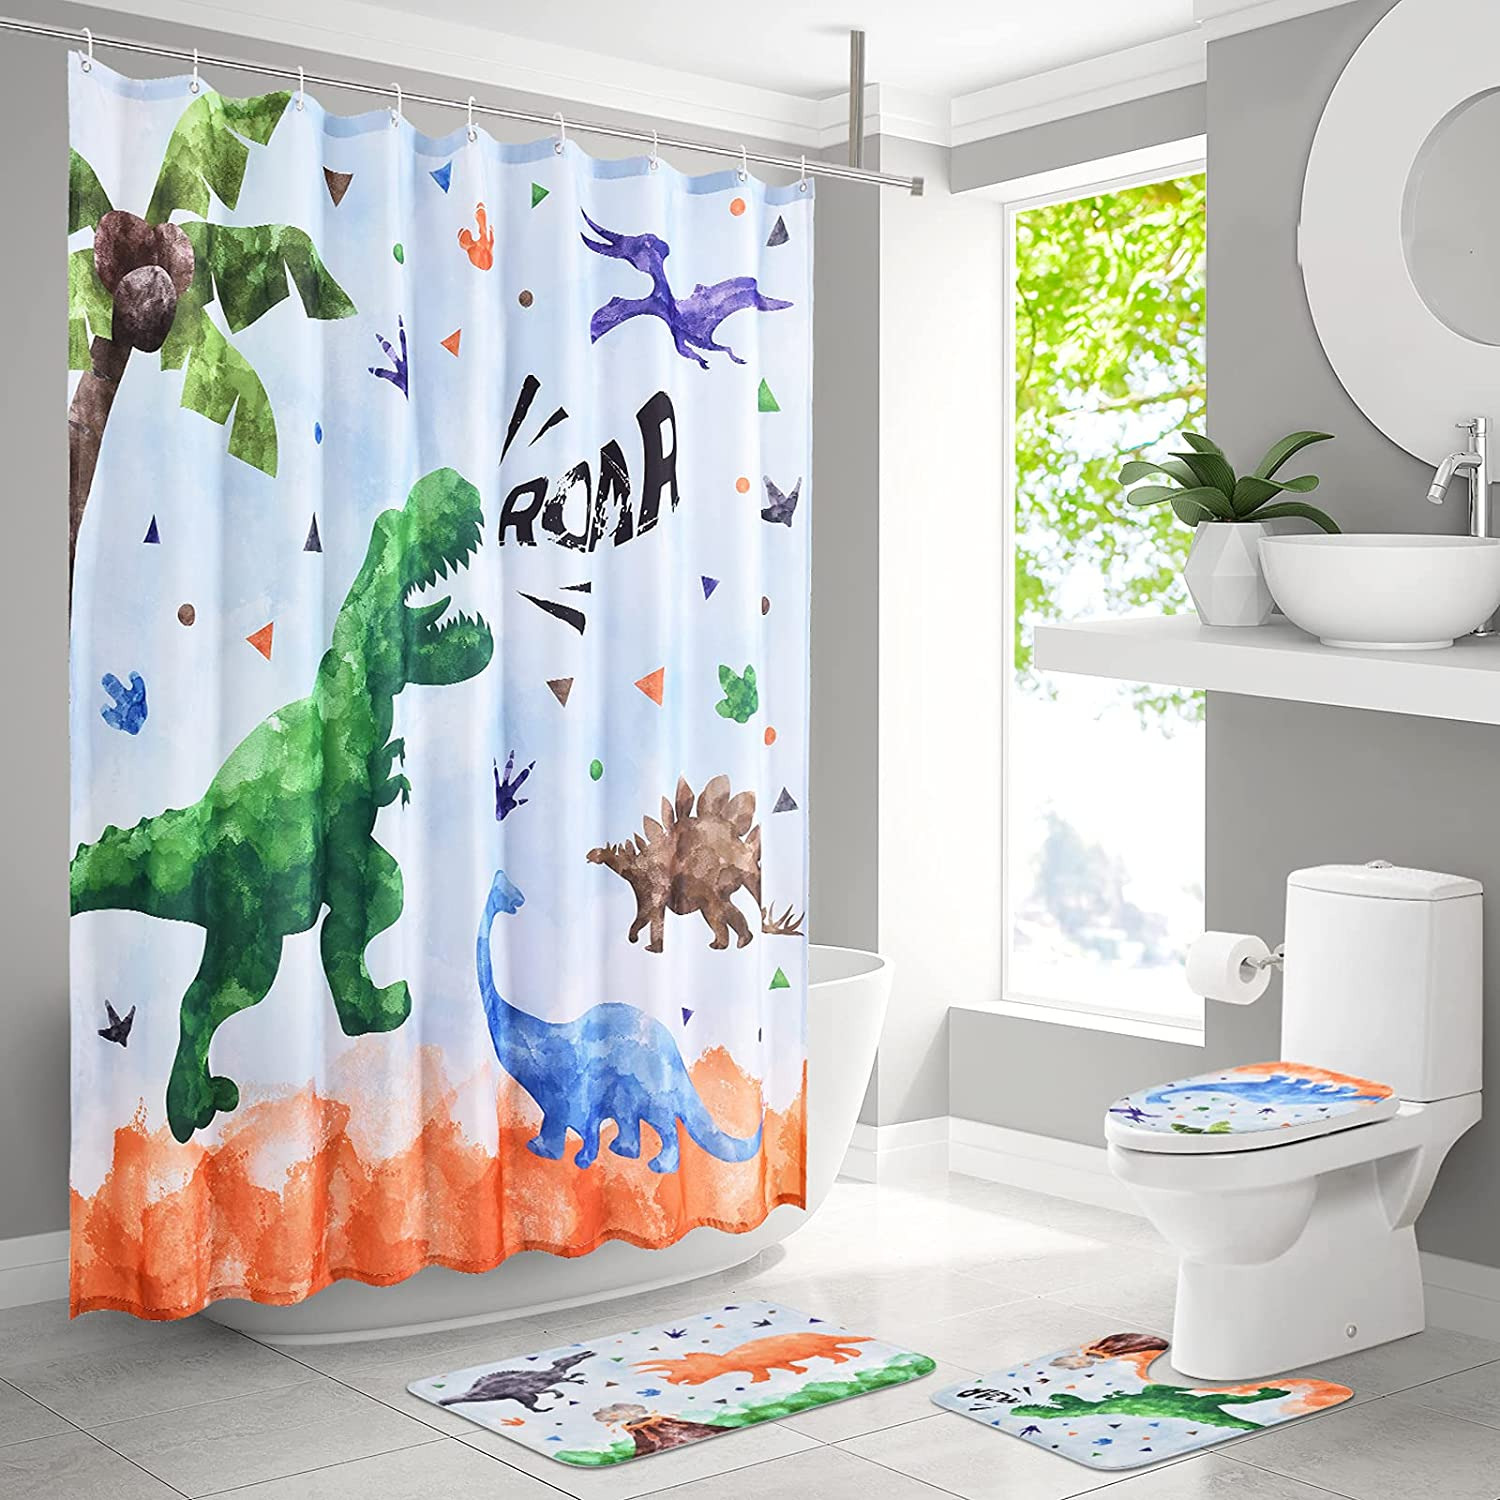 Dinosaur Shower Curtain Sets with Non-Slip Rugs - 4 Piece Bathroom Sets with Rug